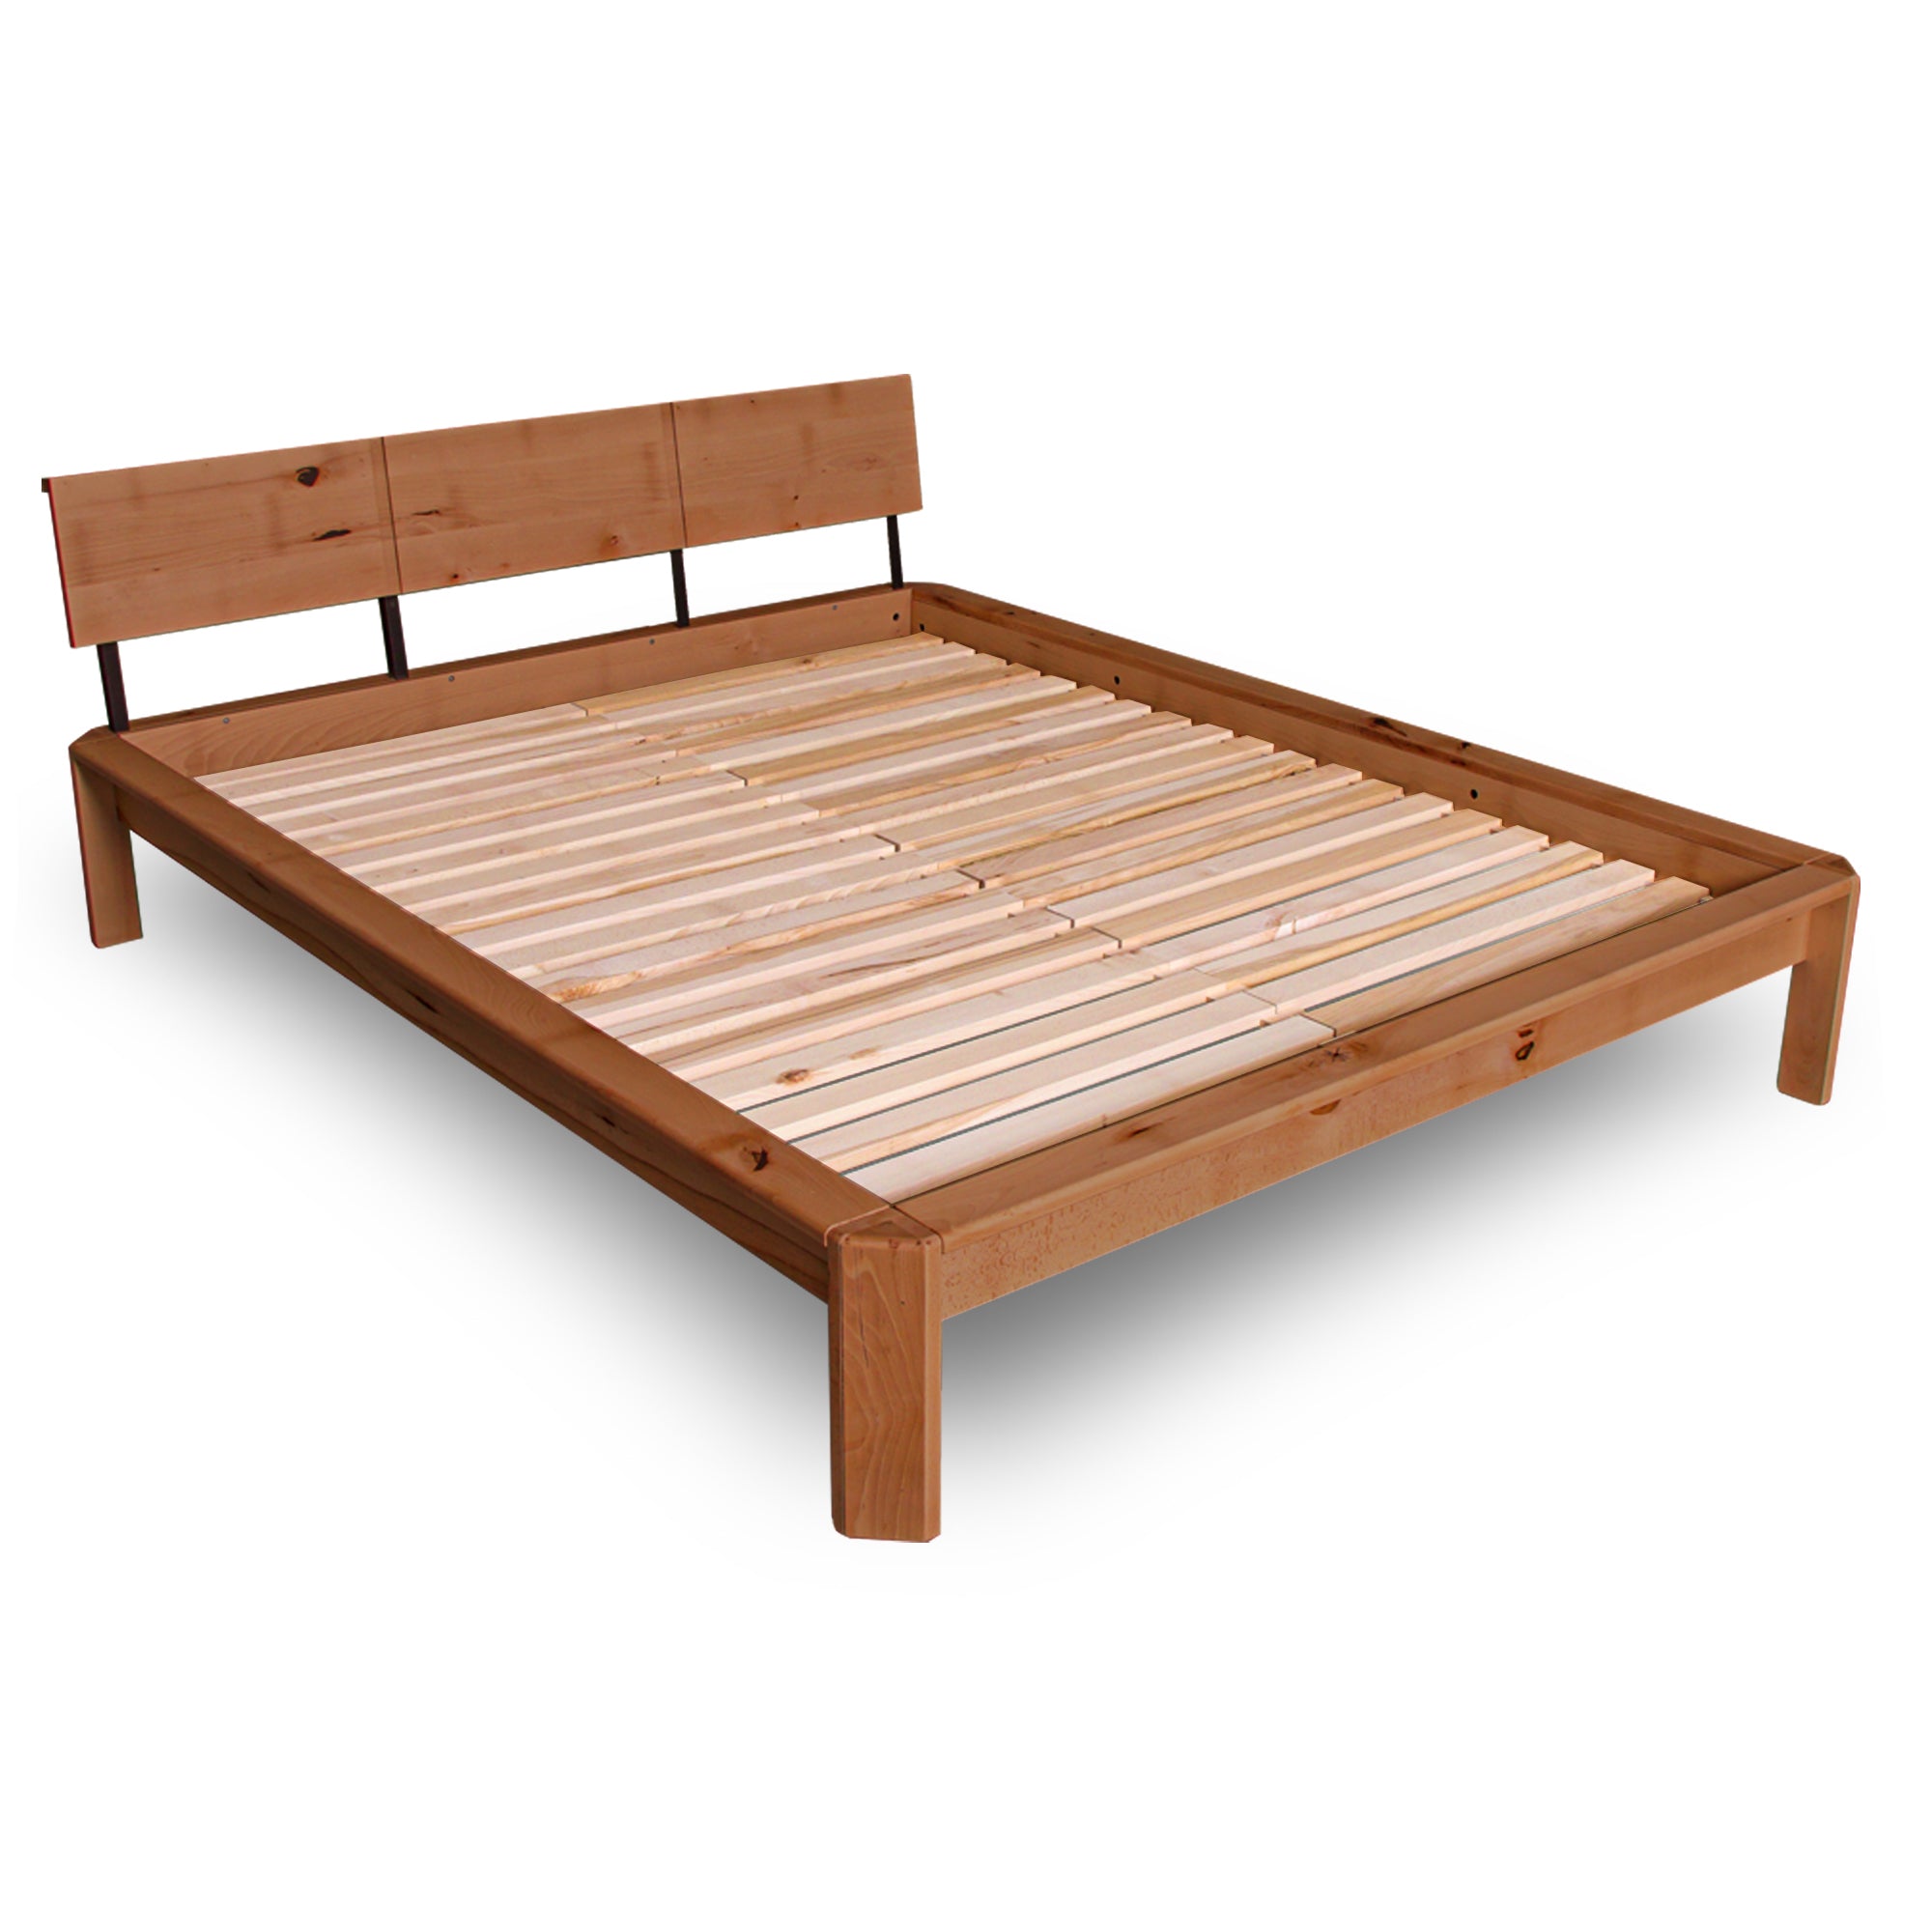 LOFT Double Bed-caramel frame-without mattress